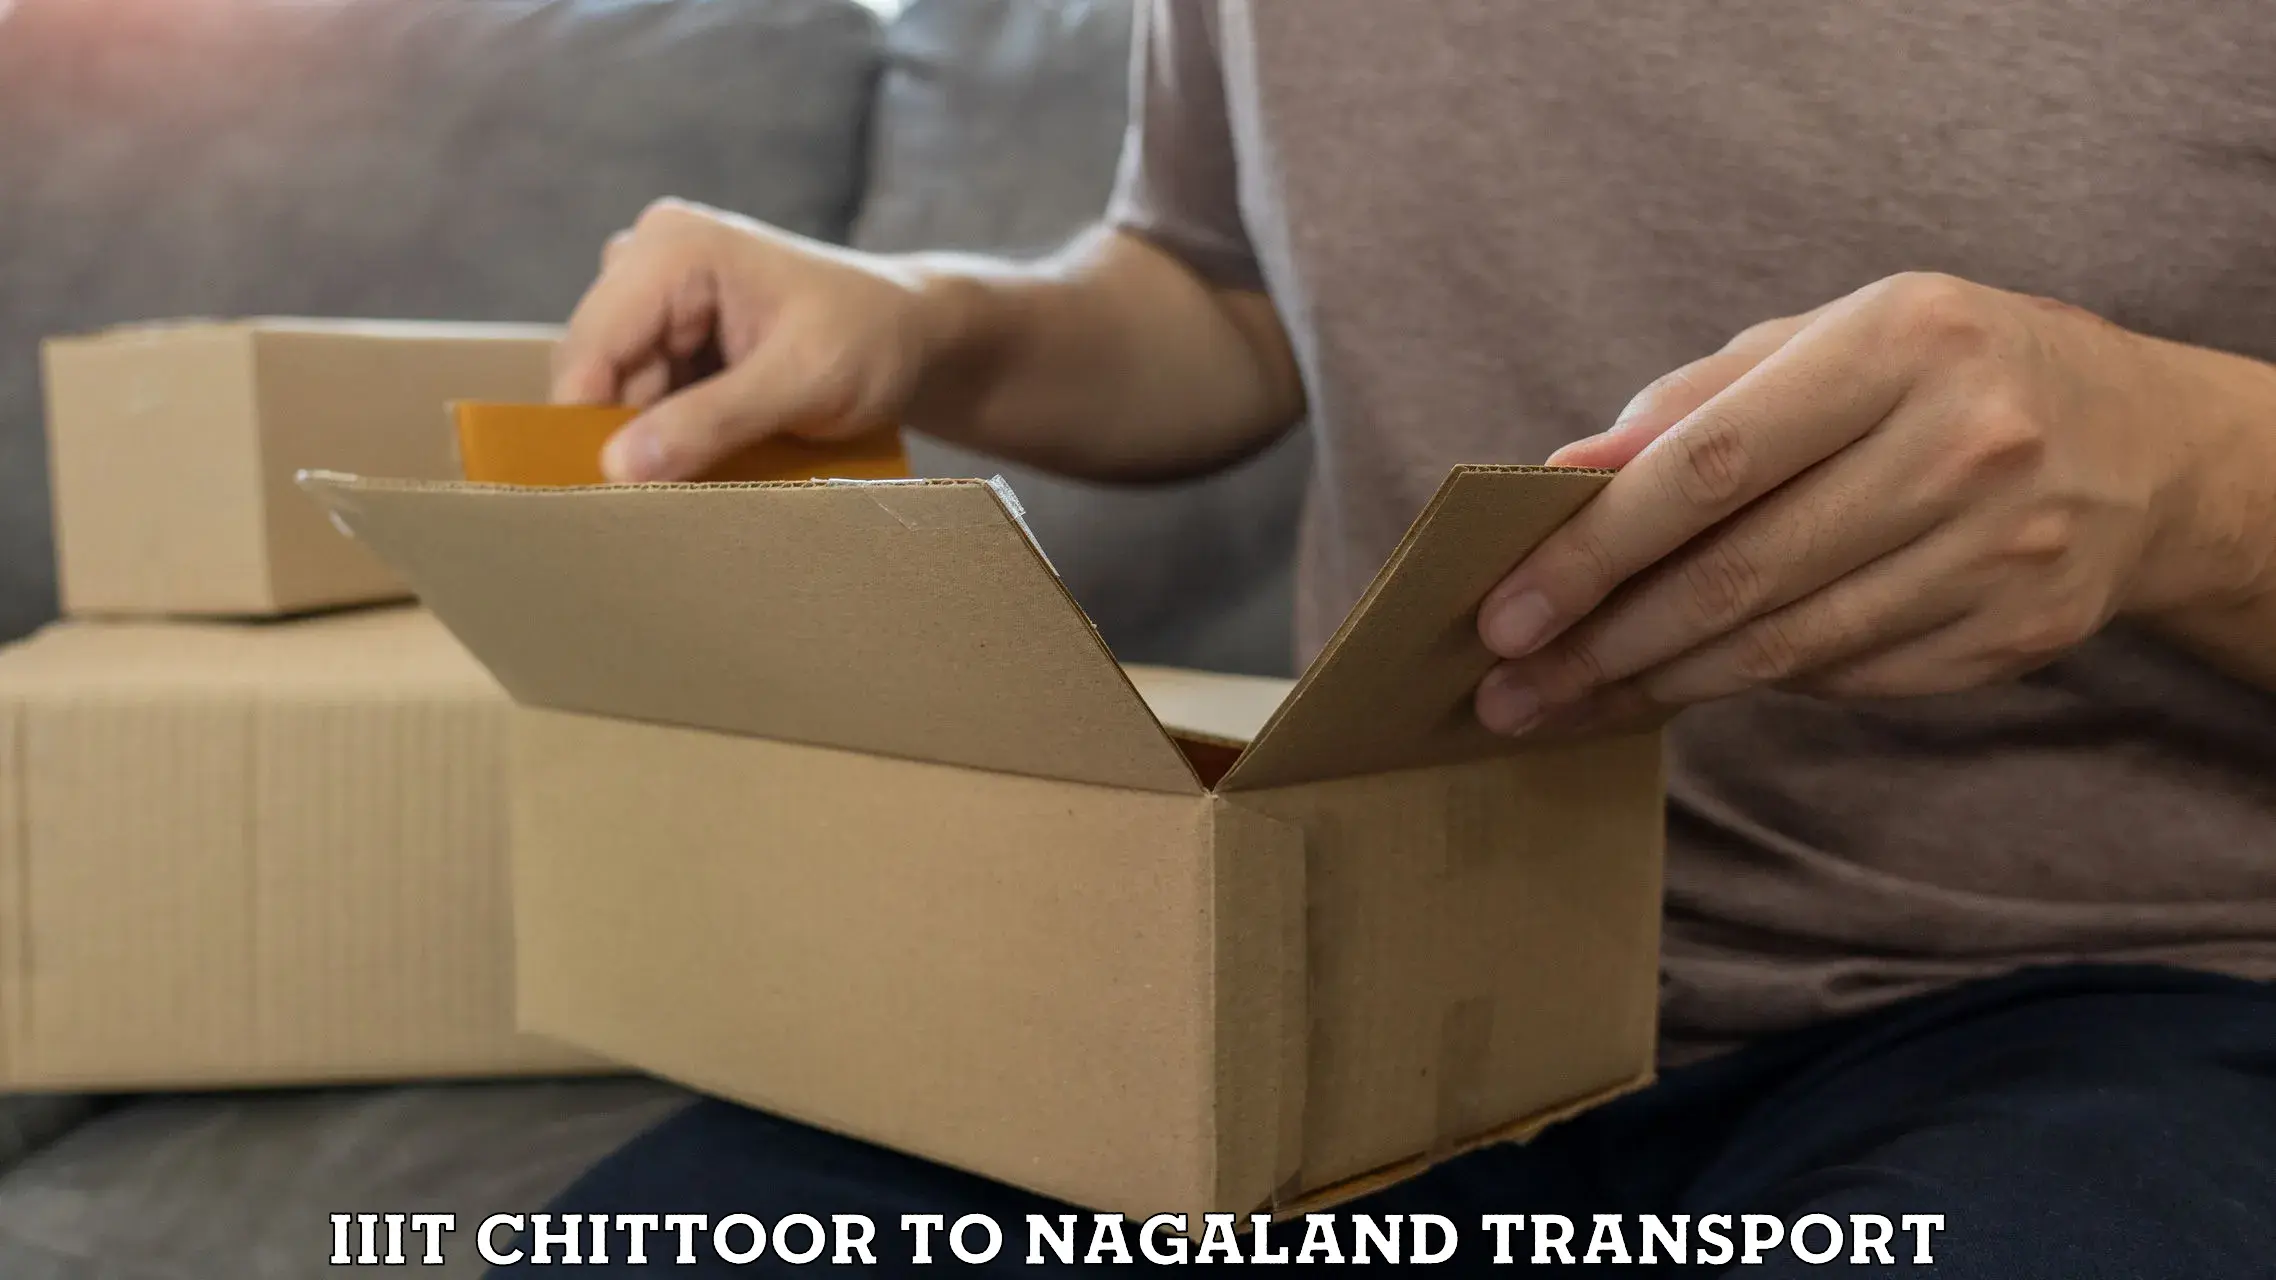 Parcel transport services IIIT Chittoor to Nagaland